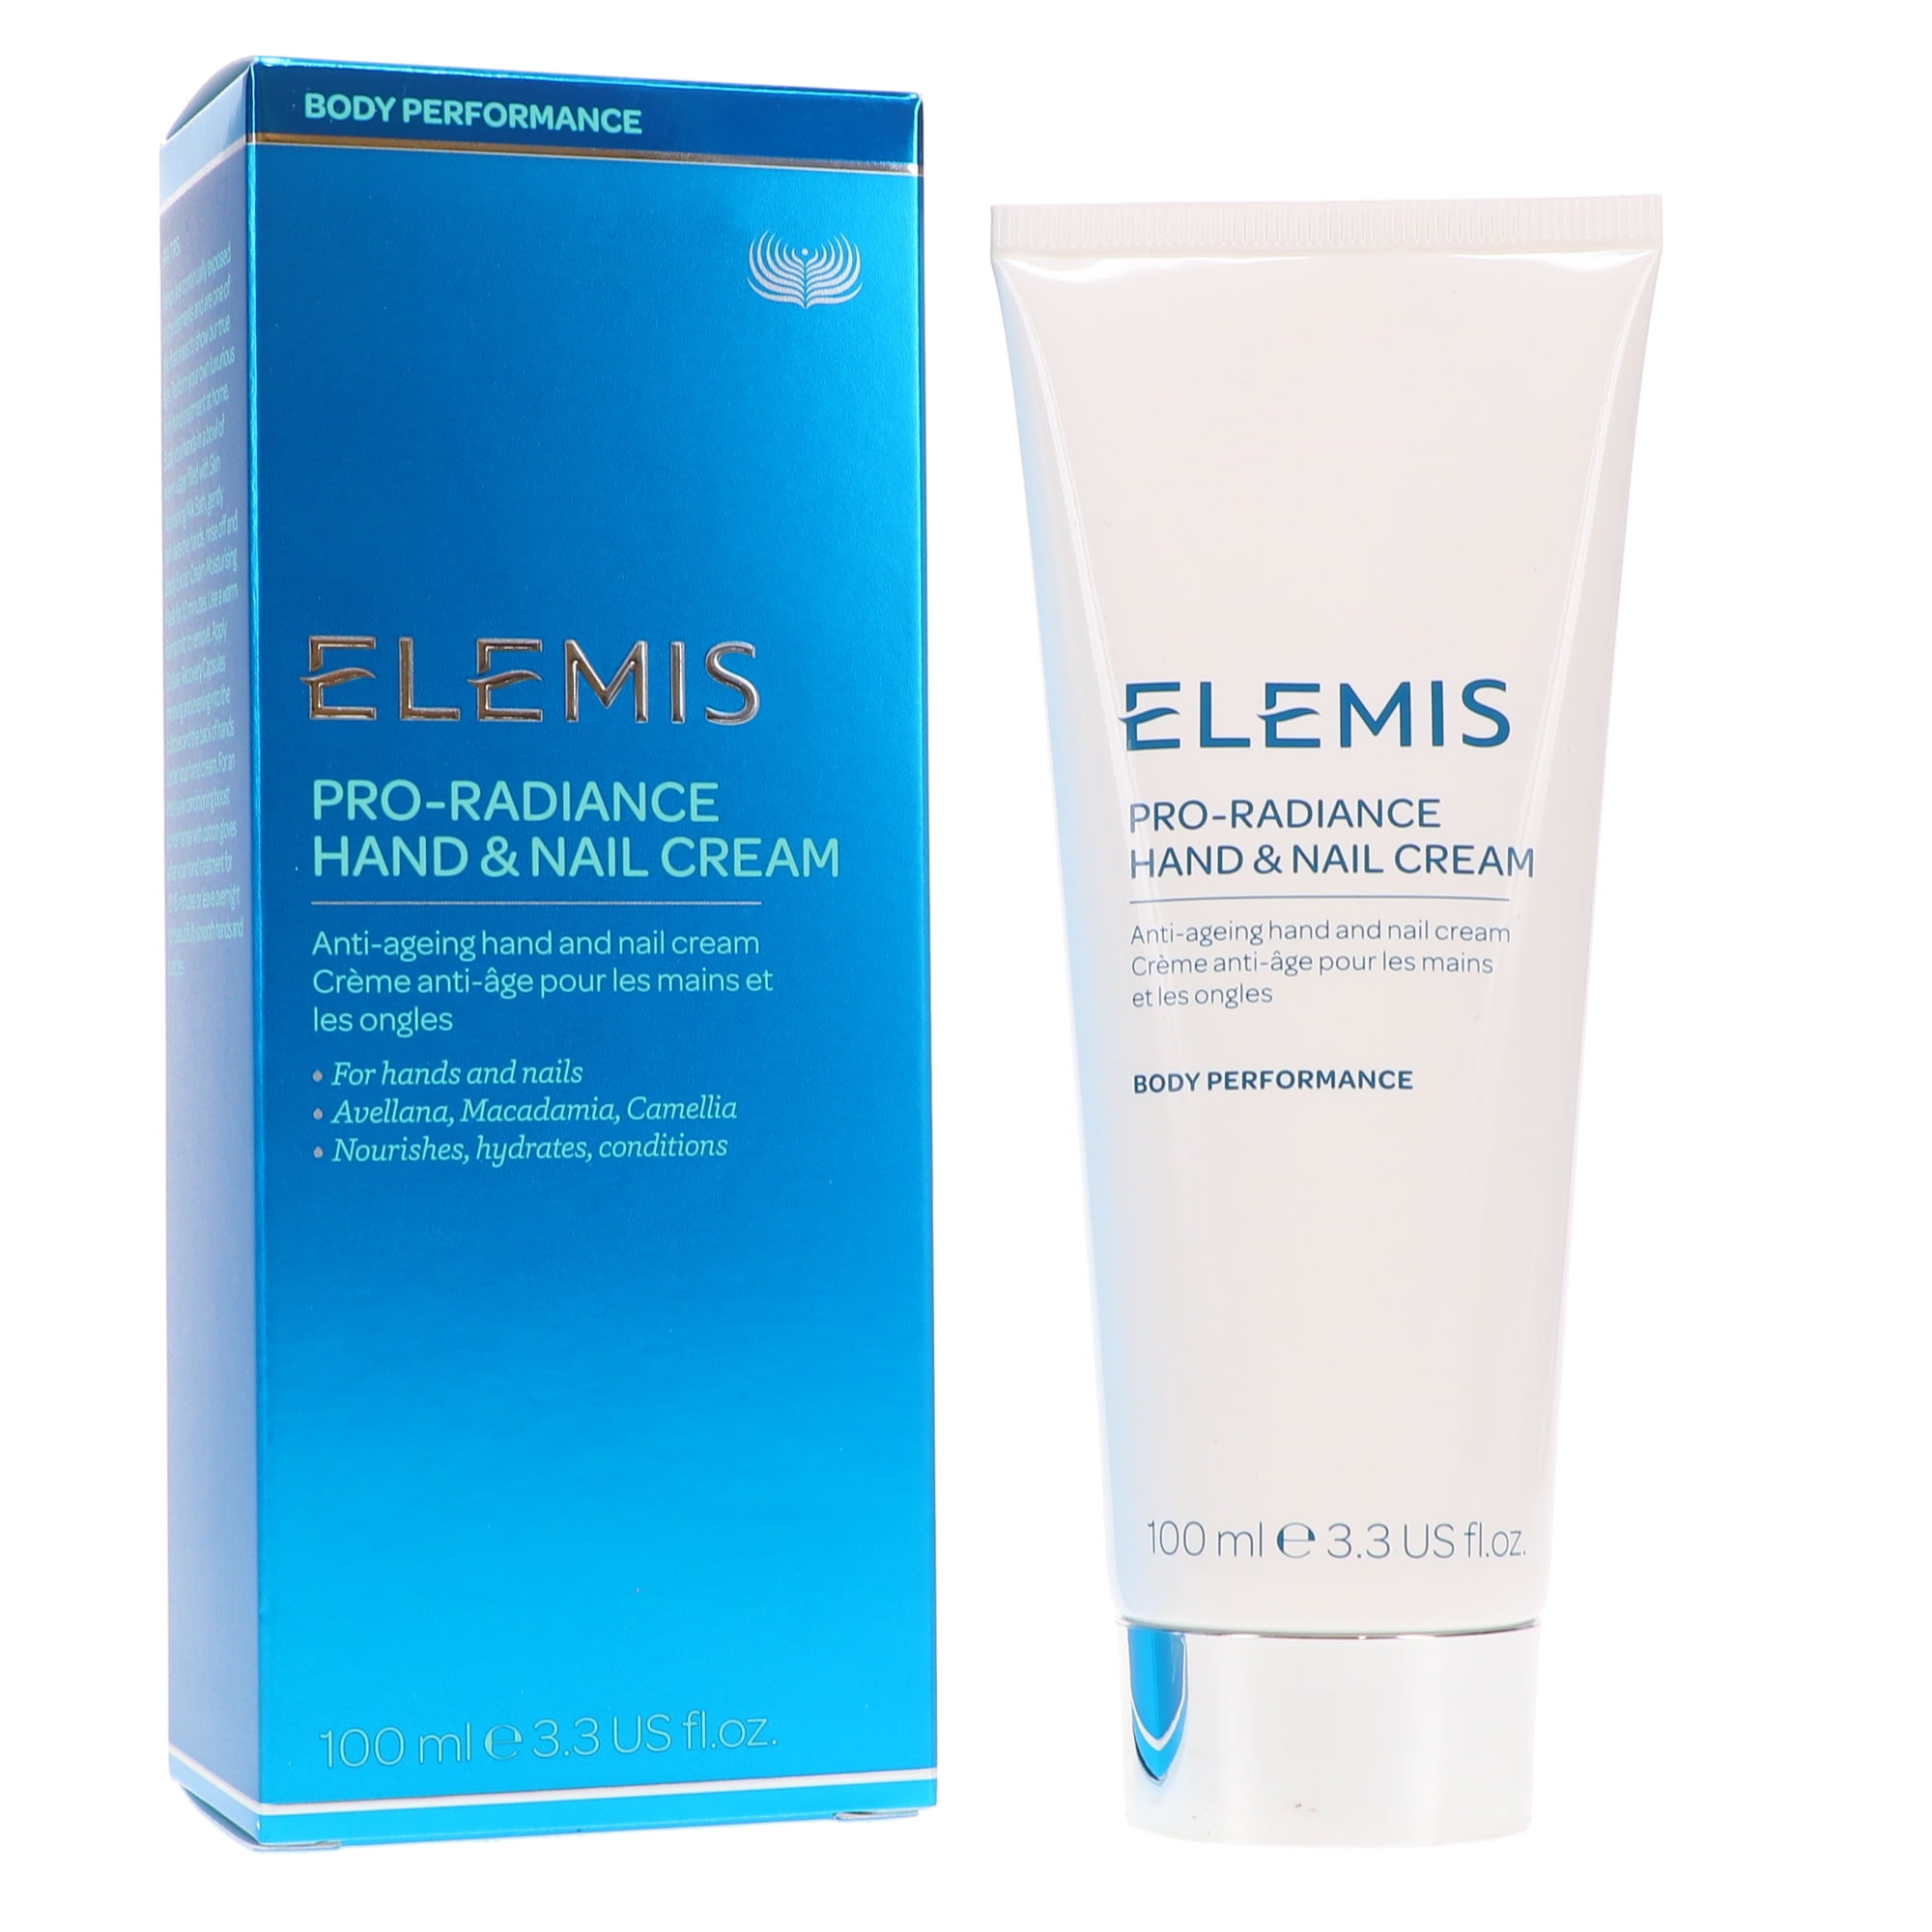 Top 10 hand creams to make your hands soft and smooth